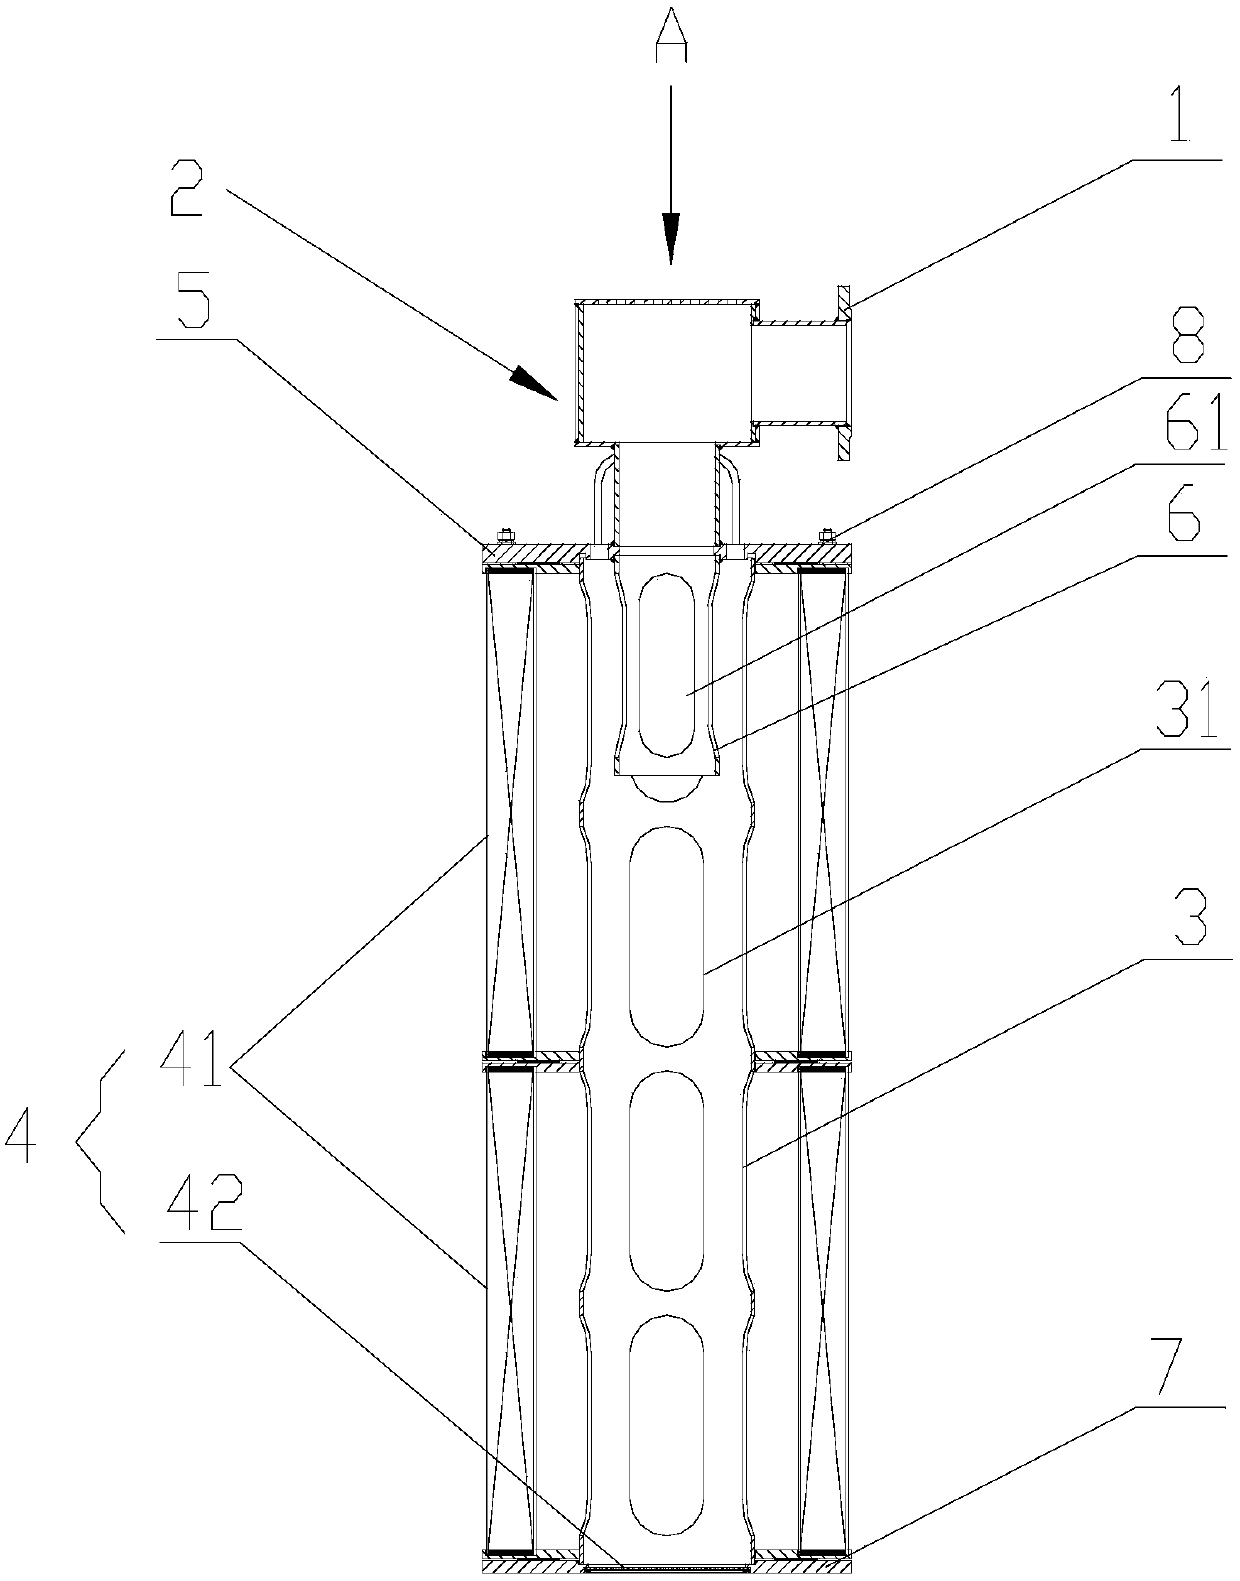 Oil returning gas removal device and lubricating oil system